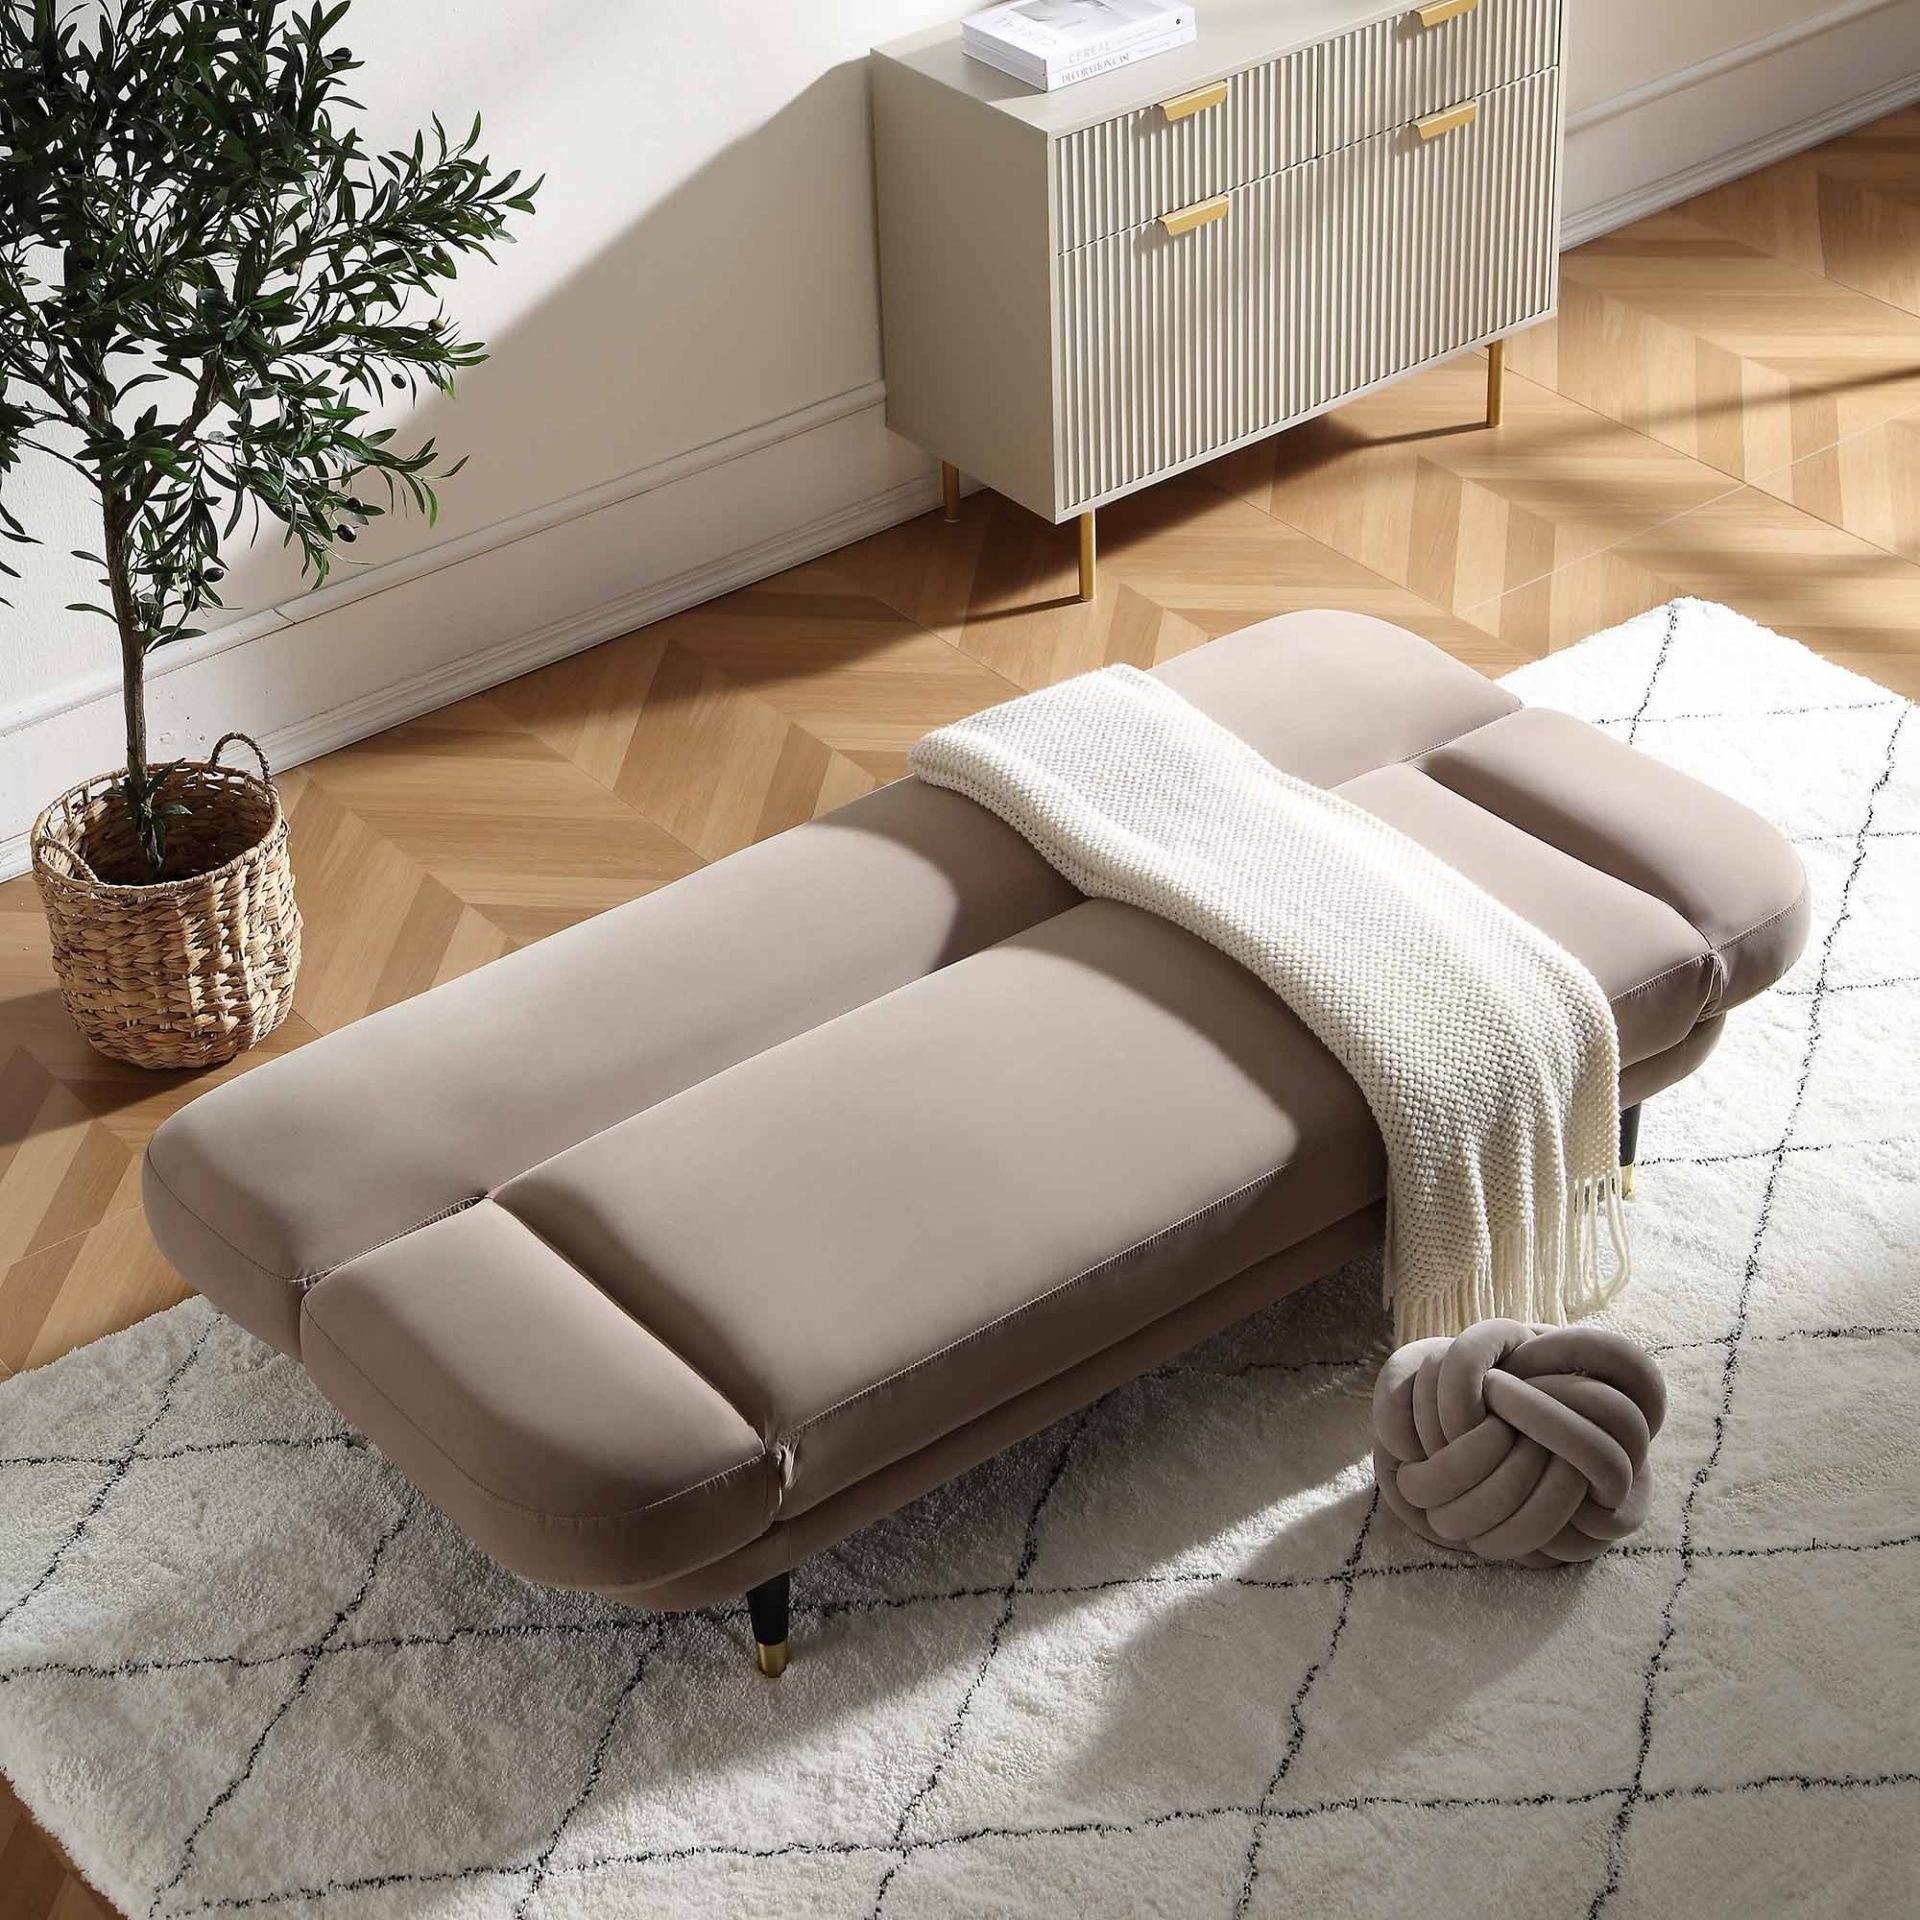 Solna 2-Seater Sofa Bed, Mink Velvet. - R14. RRP £439.99. Upholstered in sumptuous mink colour - Image 2 of 2